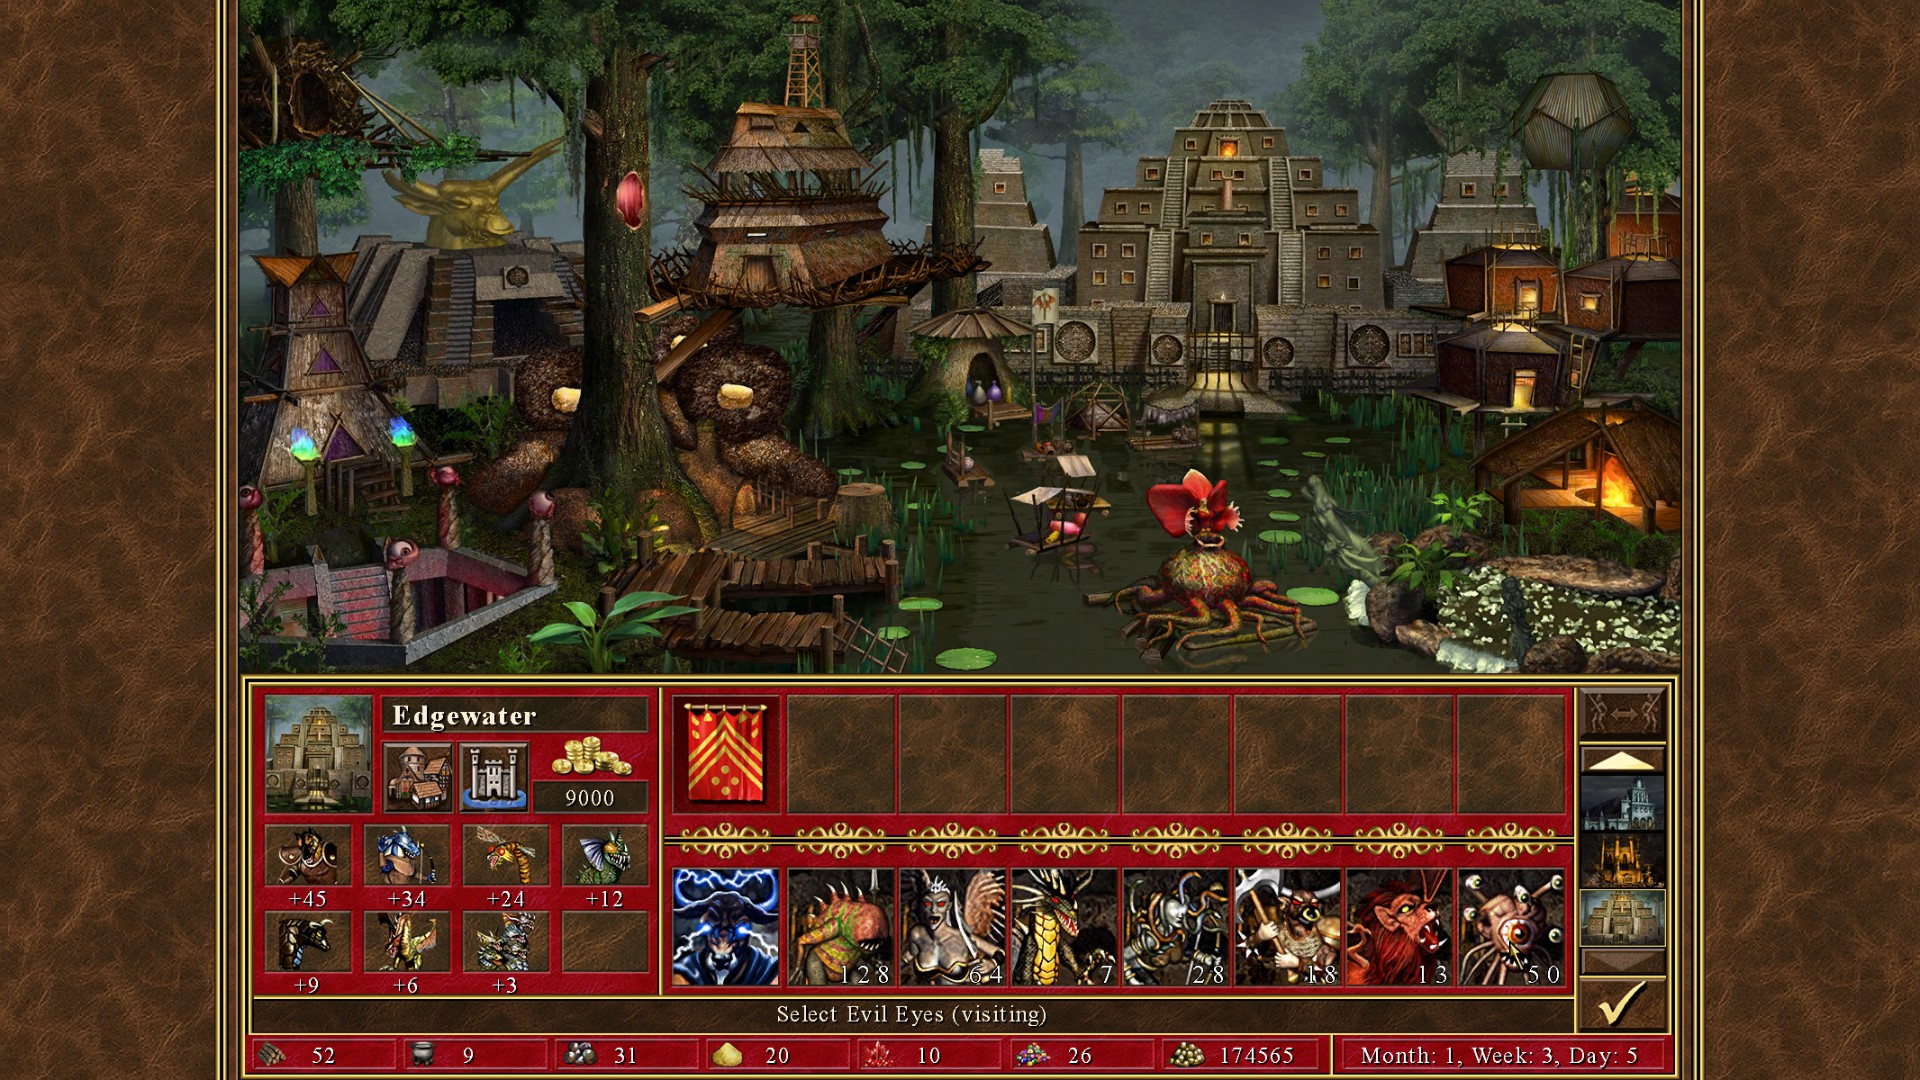 heroes of might and magic 3 hd access cheats for android